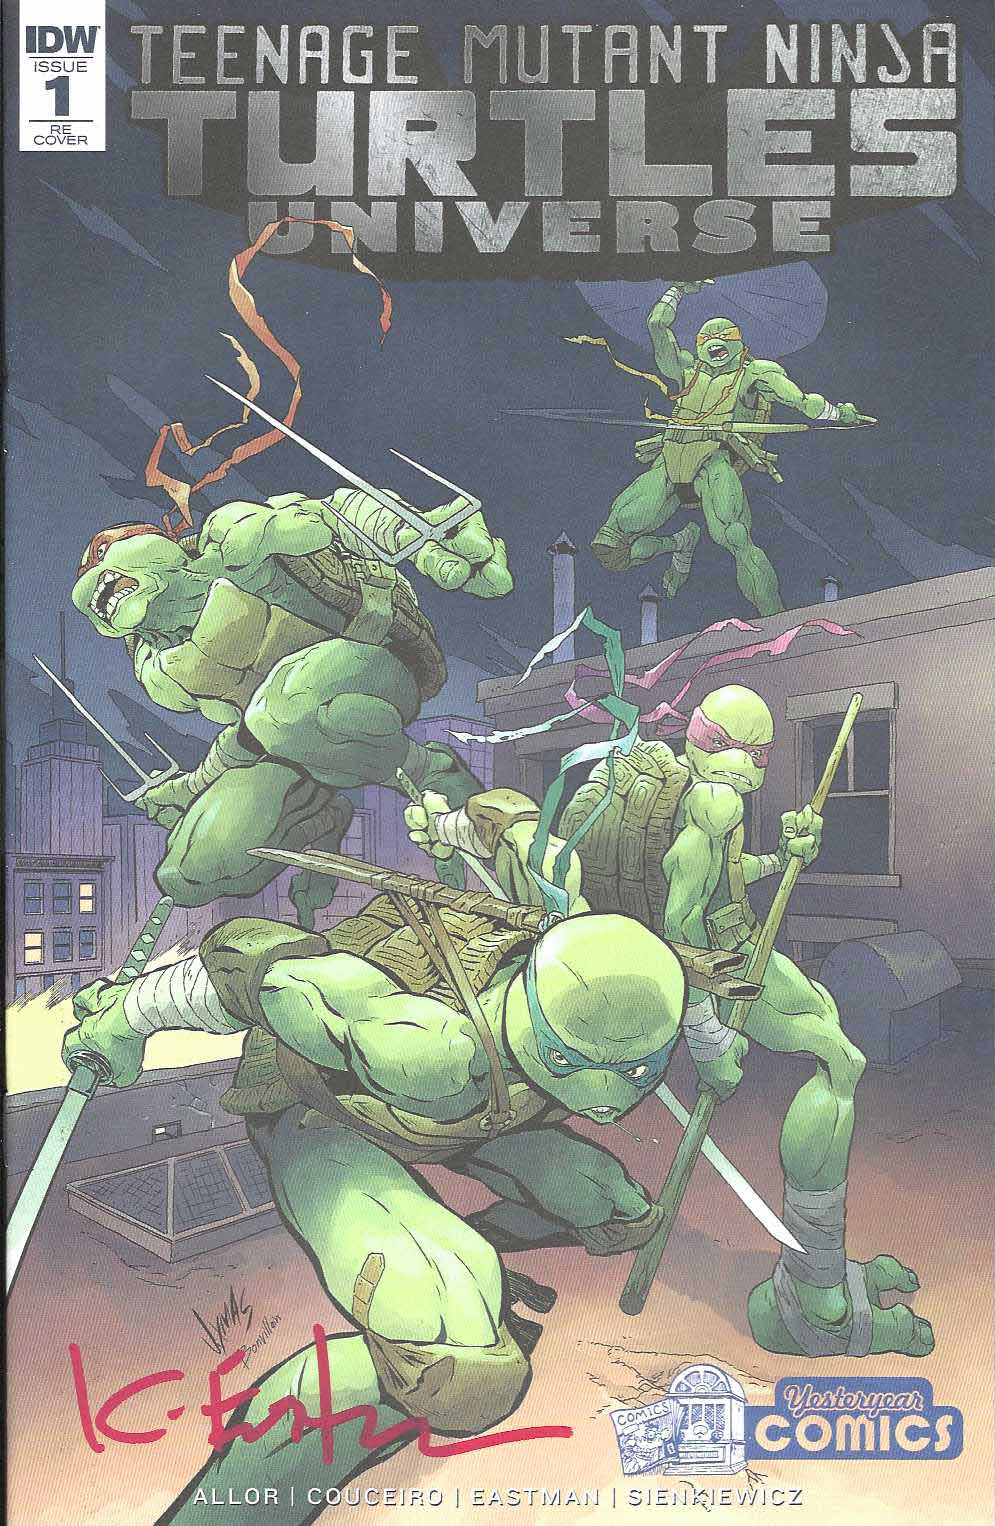 TMNT UNIVERSE #1 RE Yesteryear Variant – SIGNED